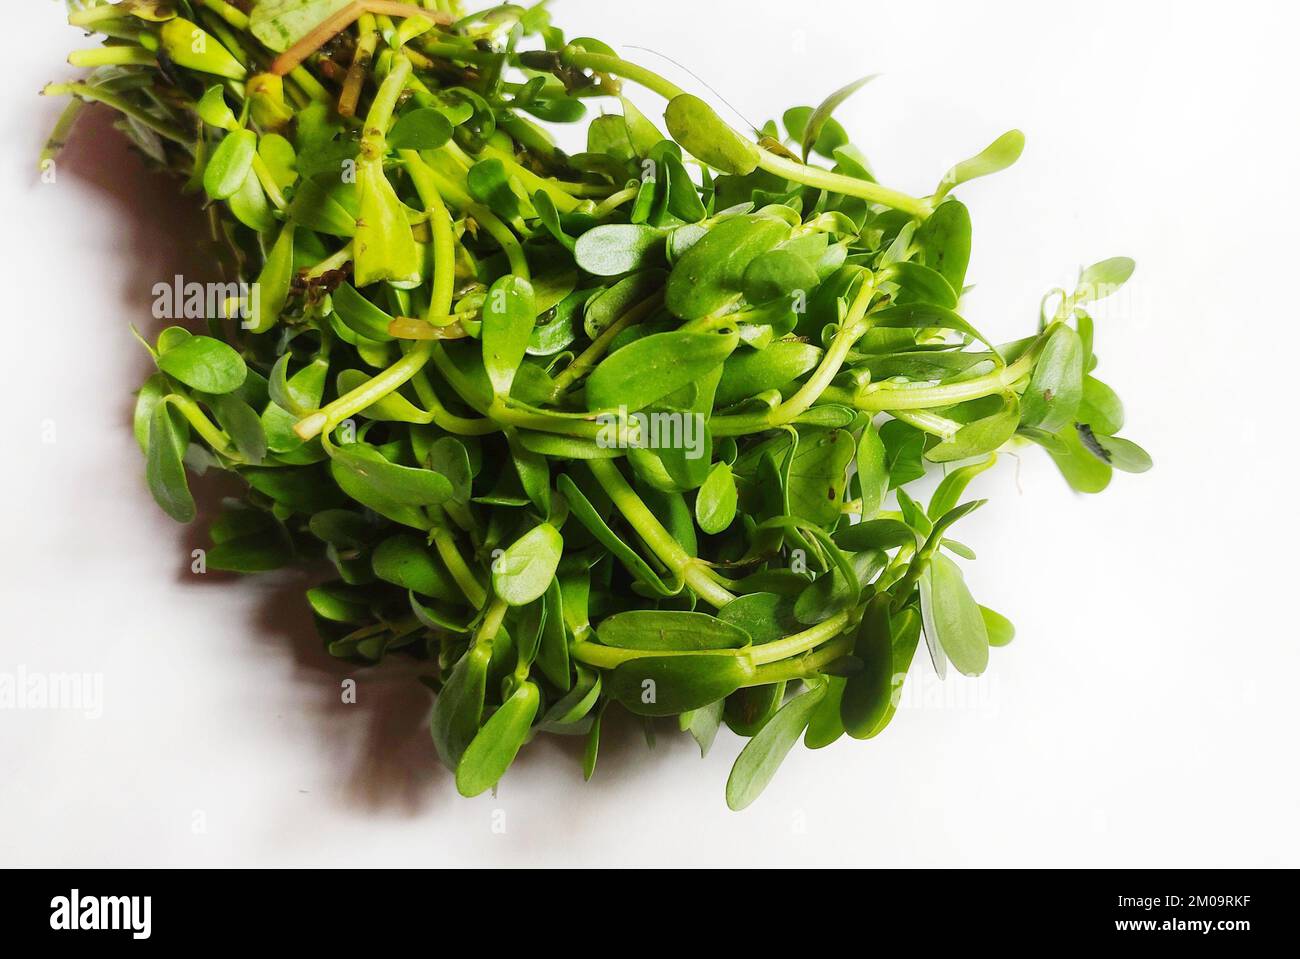 Leafy vegetable- Water hyssop or Indian pennywort. In India, it is known as Brahmi and consumed as vegetable. In Stock Photo